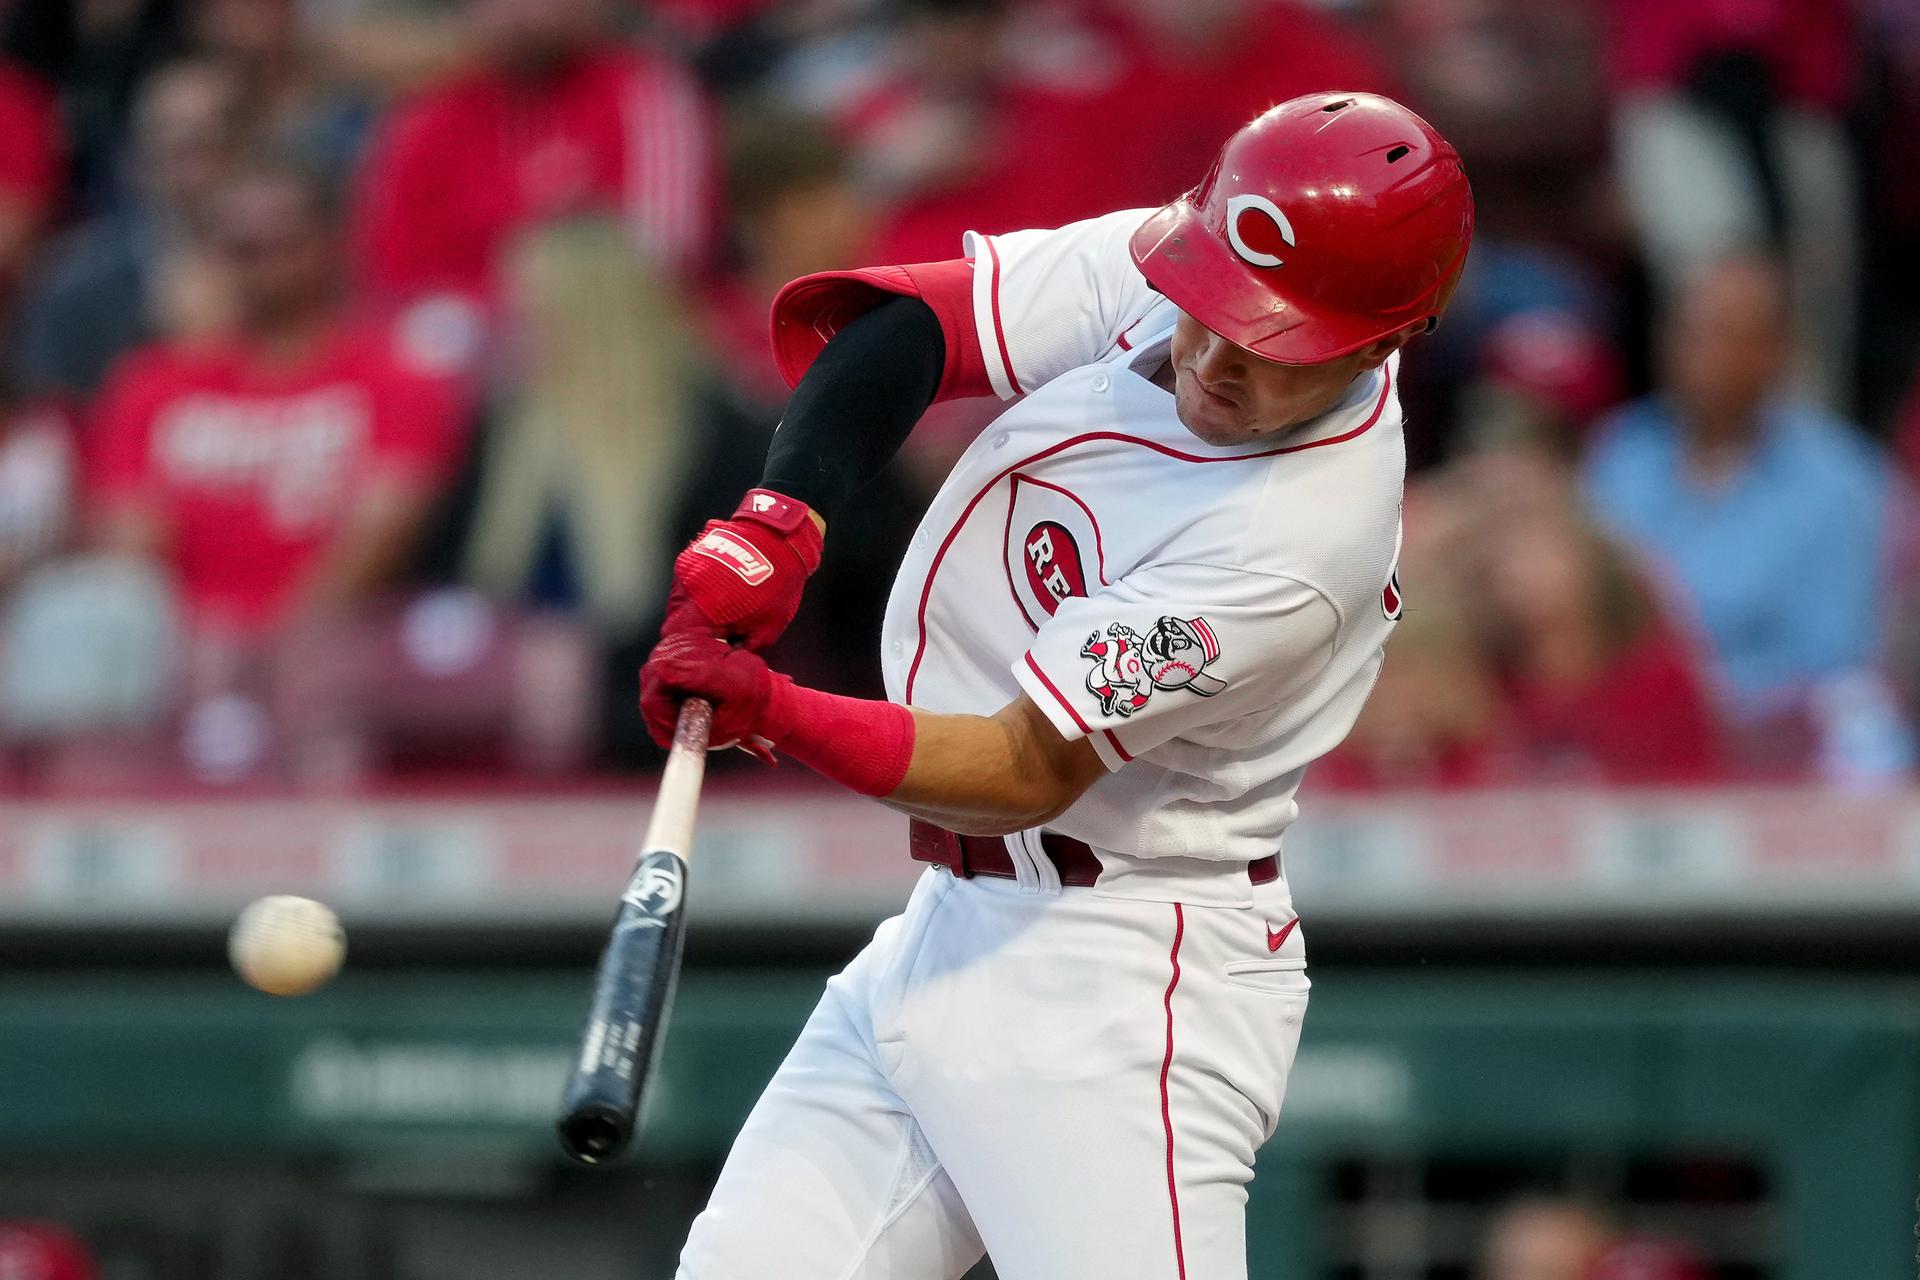 Reds player Alejo Lopez swings the bat and hits a single during a game